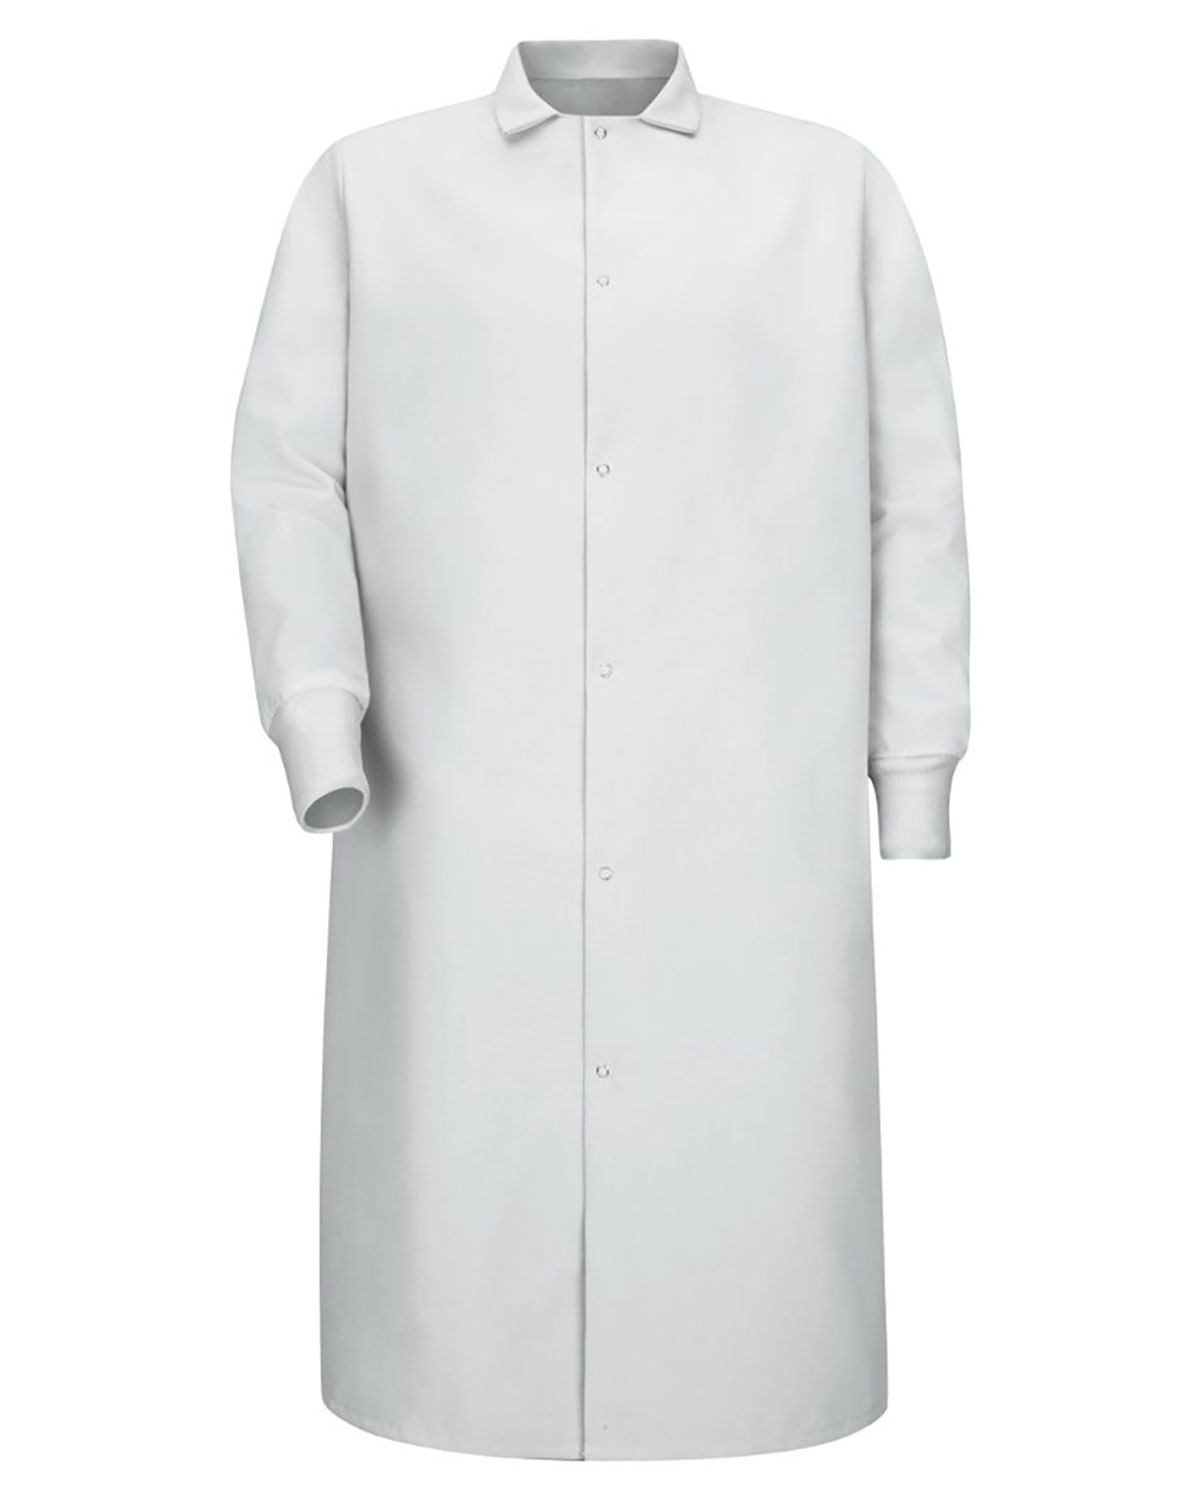 Gripper-Front Pocketless Butcher Coat With Knit Cuffs